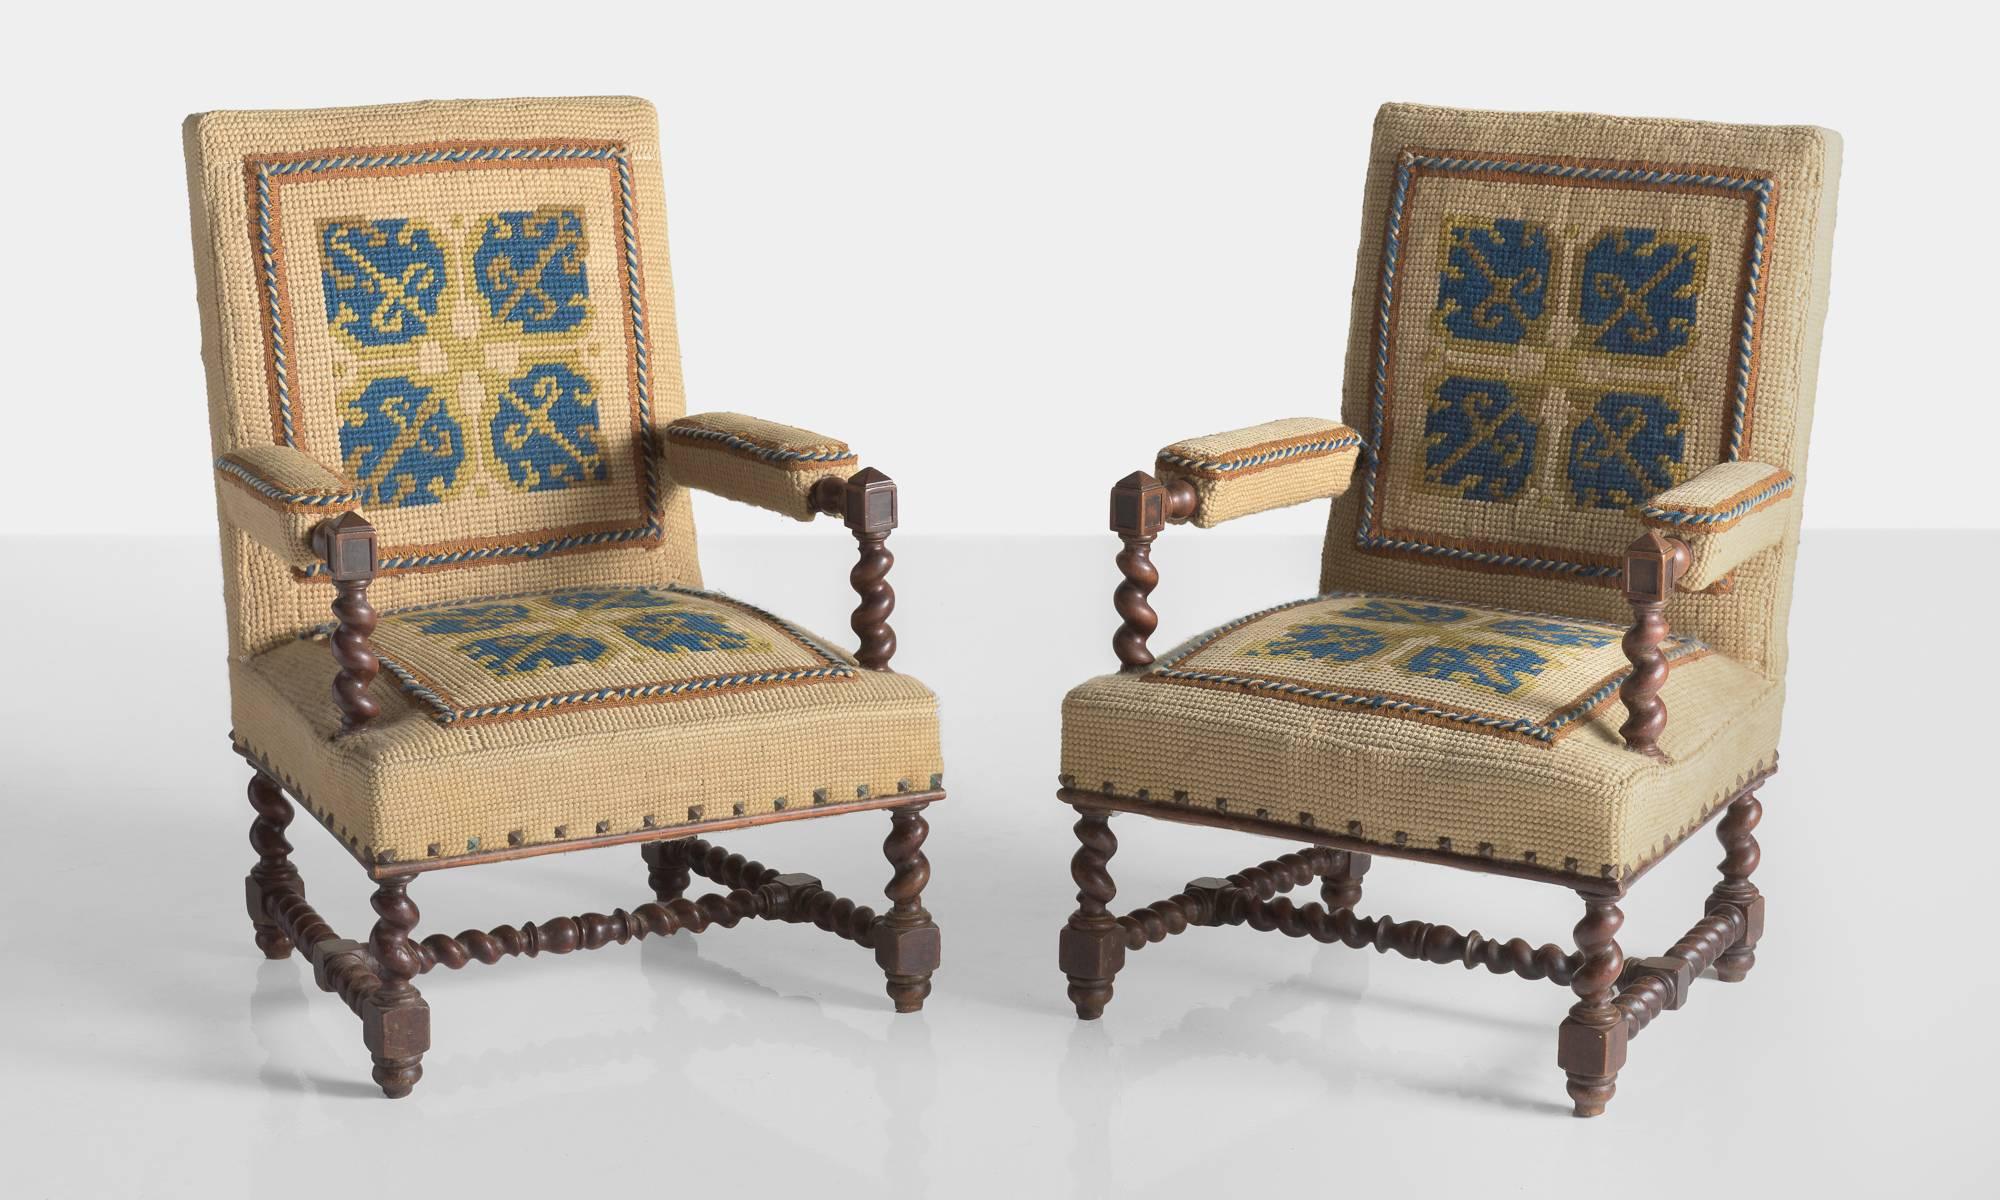 Carpet chairs, France, circa 1890

Unique pair of chairs upholstered in a thickly textured carpet-like material featuring a geometric woven motif. Includes elegantly turned oak arms and legs.

Measures: 15